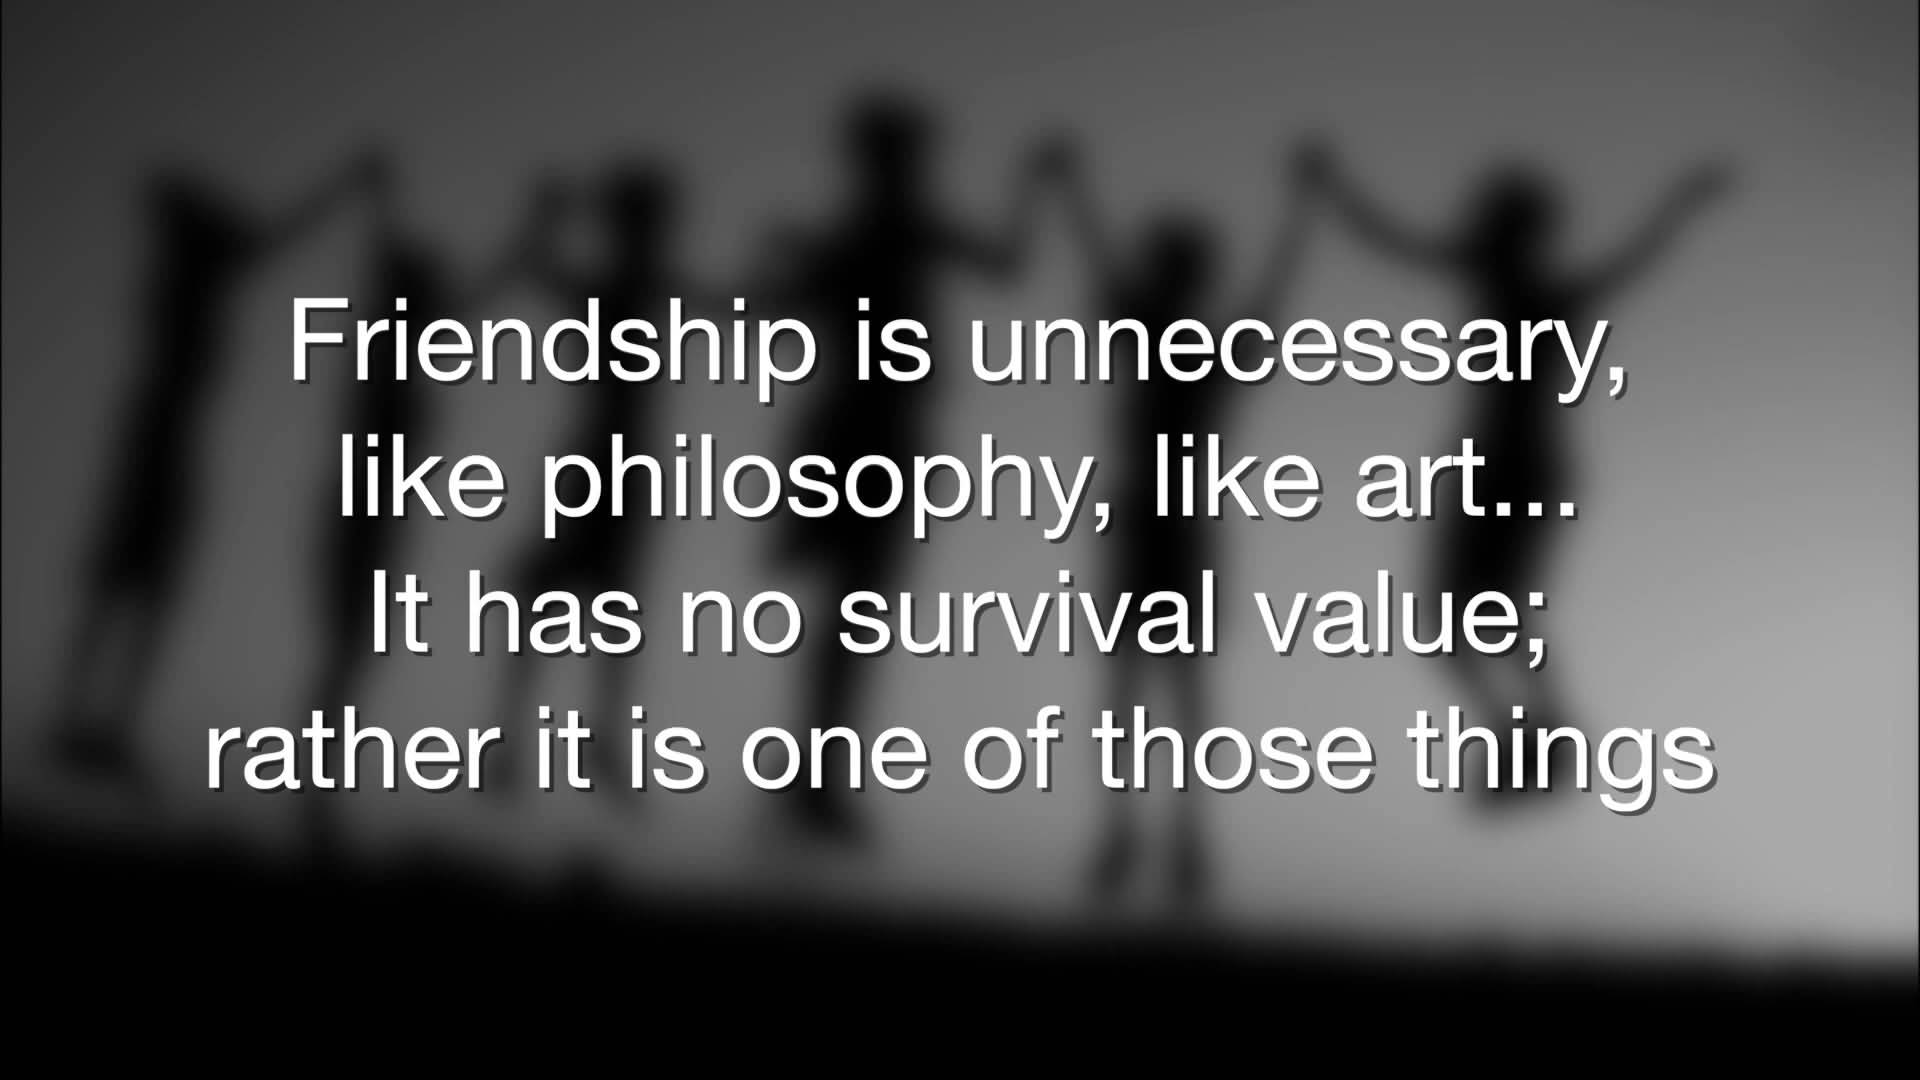 Philosophical Quotes About Friendship 17 | QuotesBae